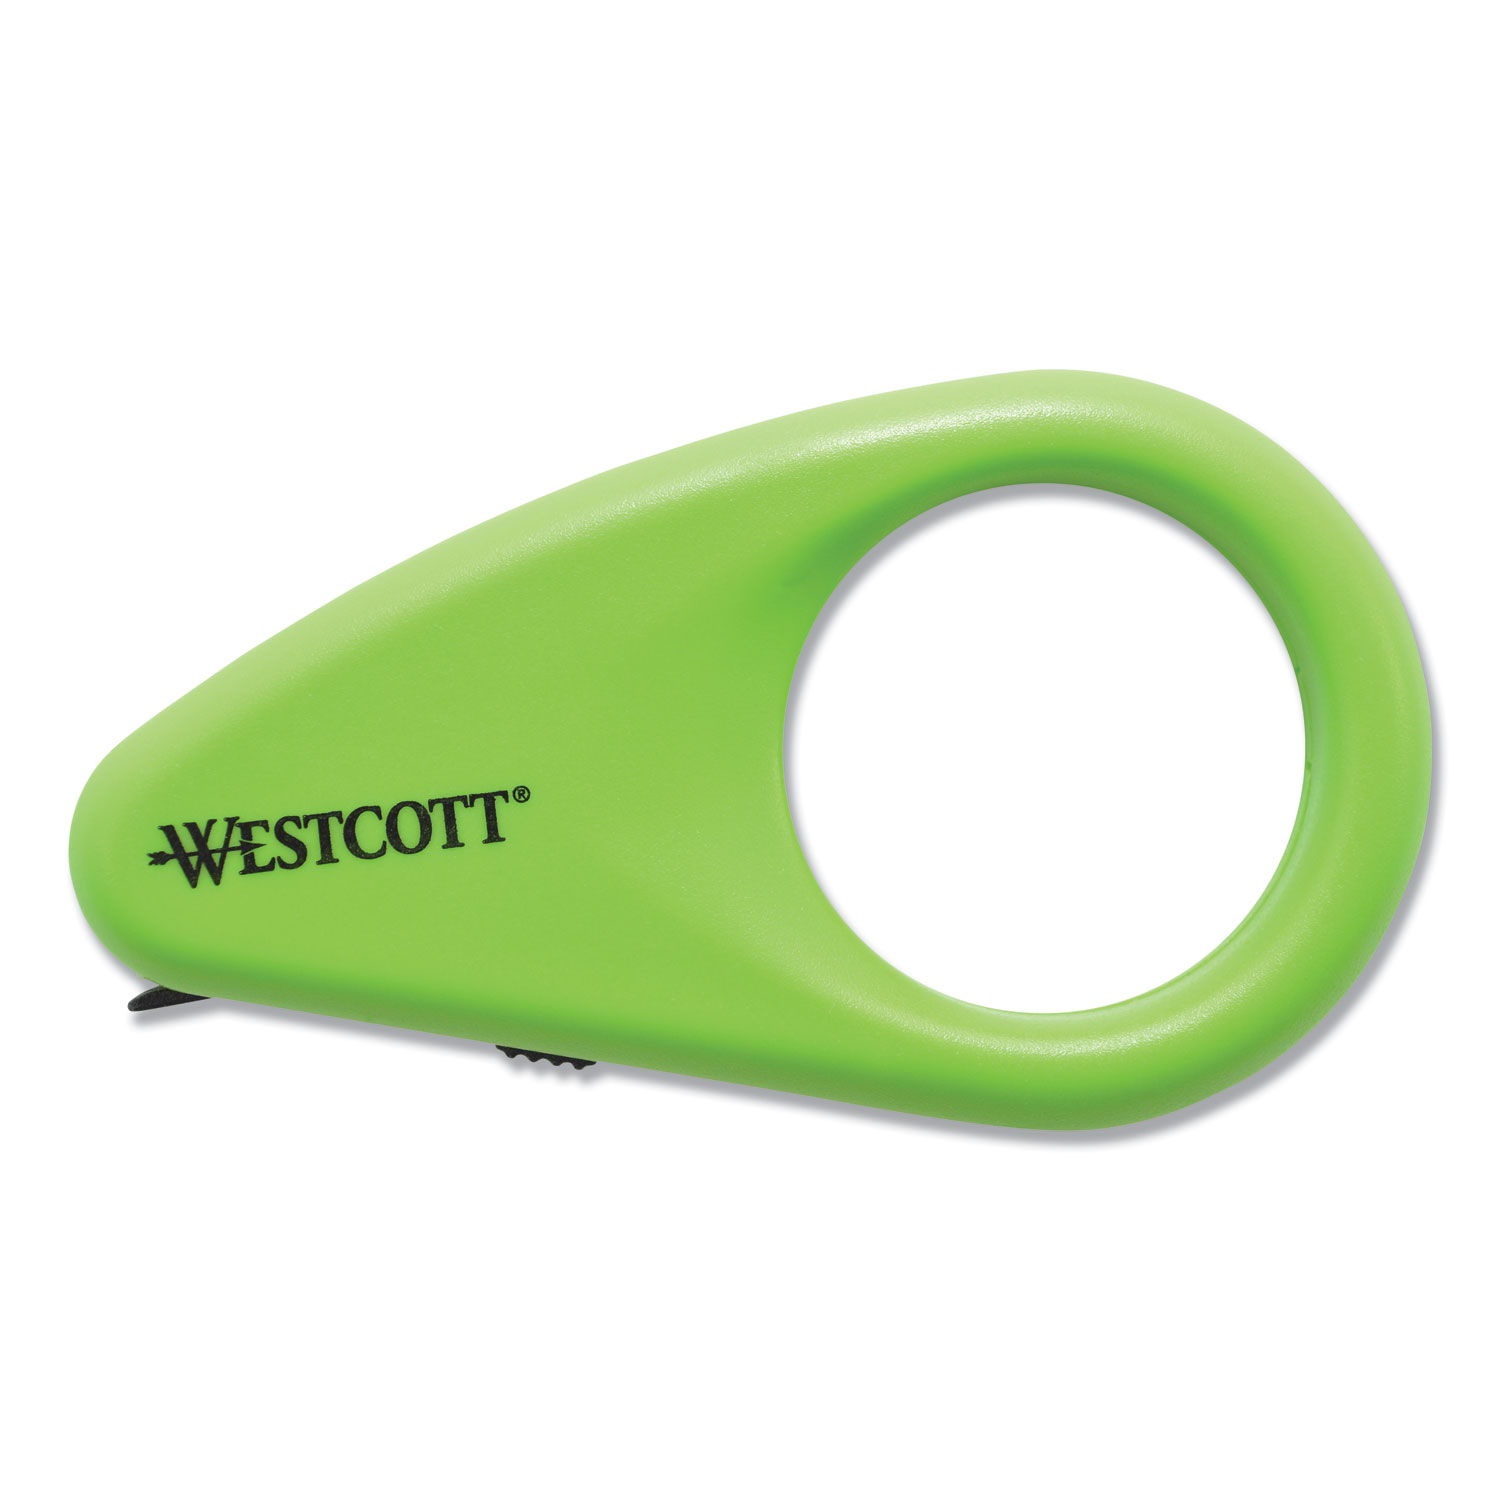  Westcott 16473 Compact Safety Ceramic Blade Box Cutter, 2.25, Fixed Blade, Green (ACM16473) 